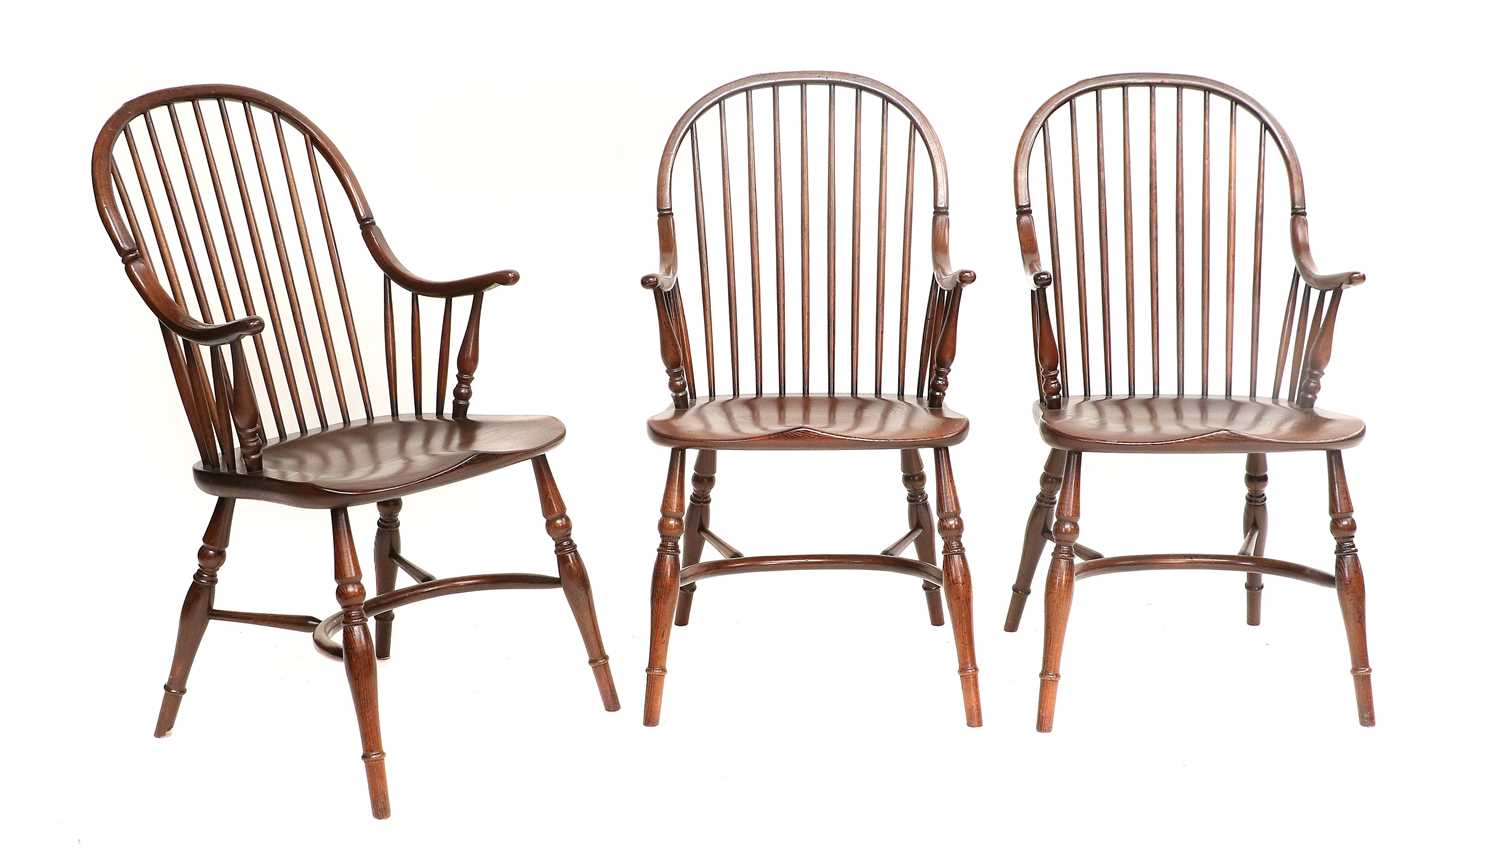 A Set of Six Stained Oak/Ash Windsor-Style Armchairs, of recent date, each with spindle back - Image 3 of 3